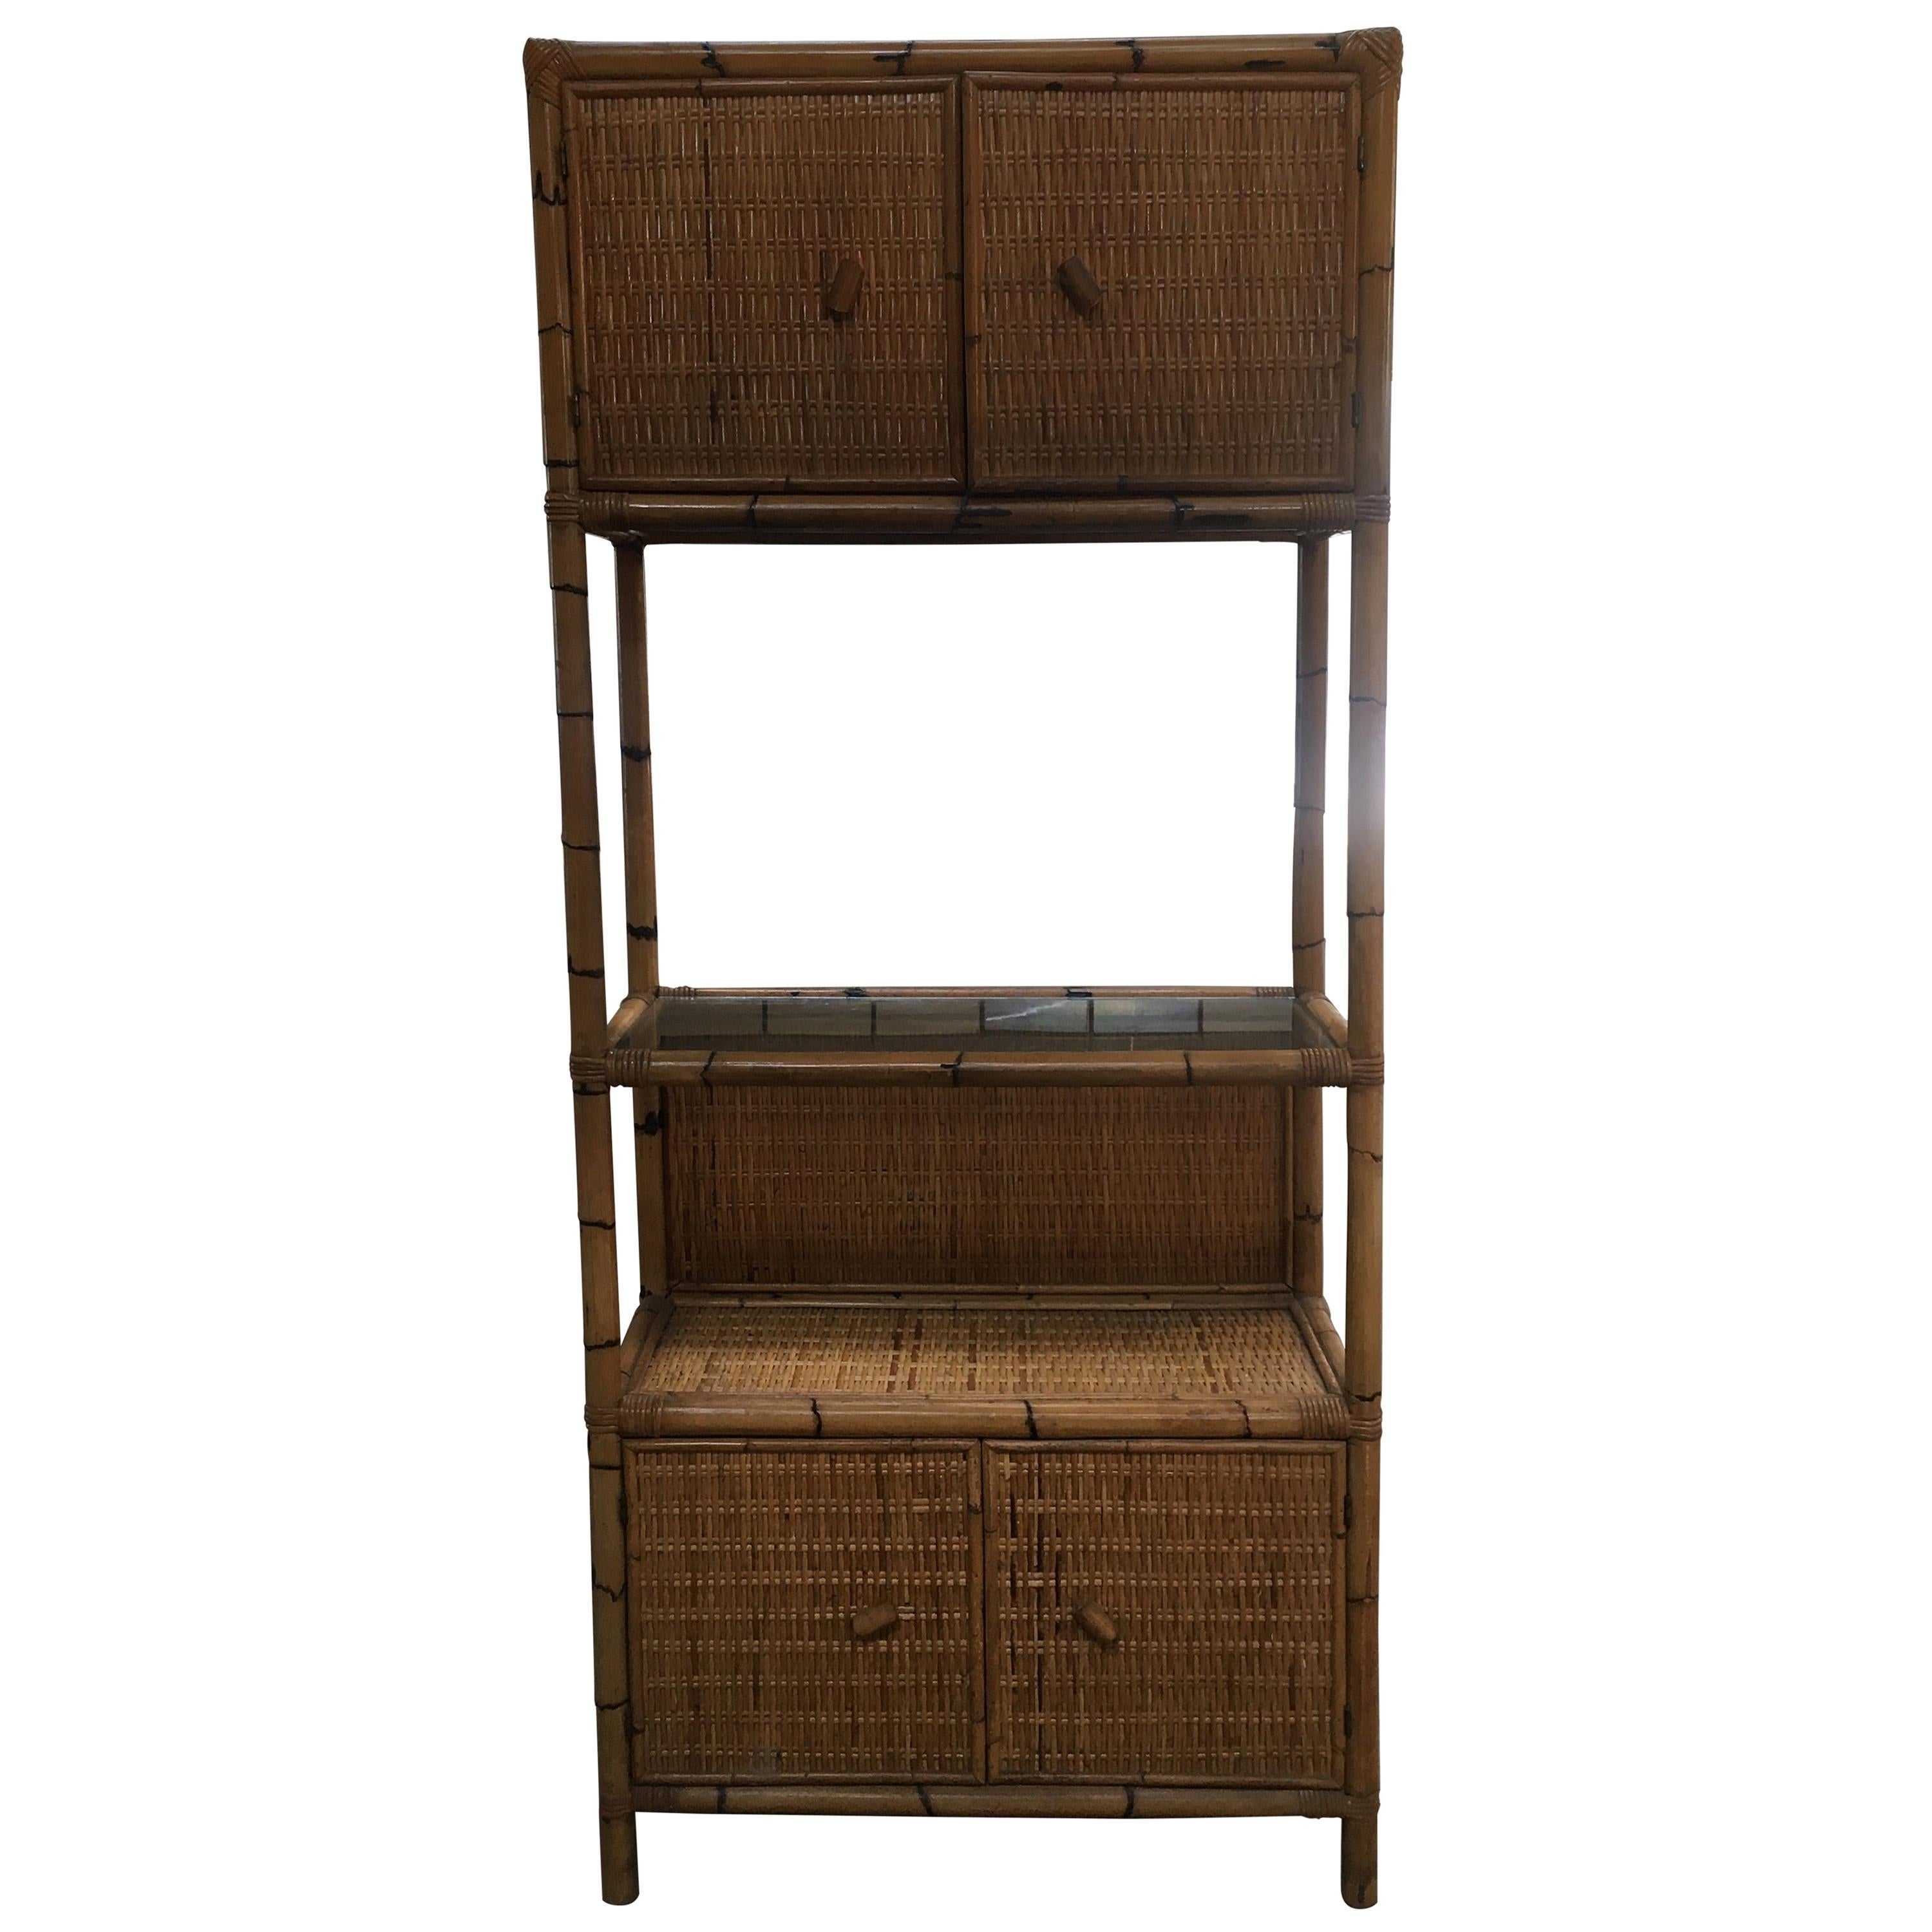 Mid-Century Modern Italian Bamboo Étagère with Shutters and Shelf, 1970s